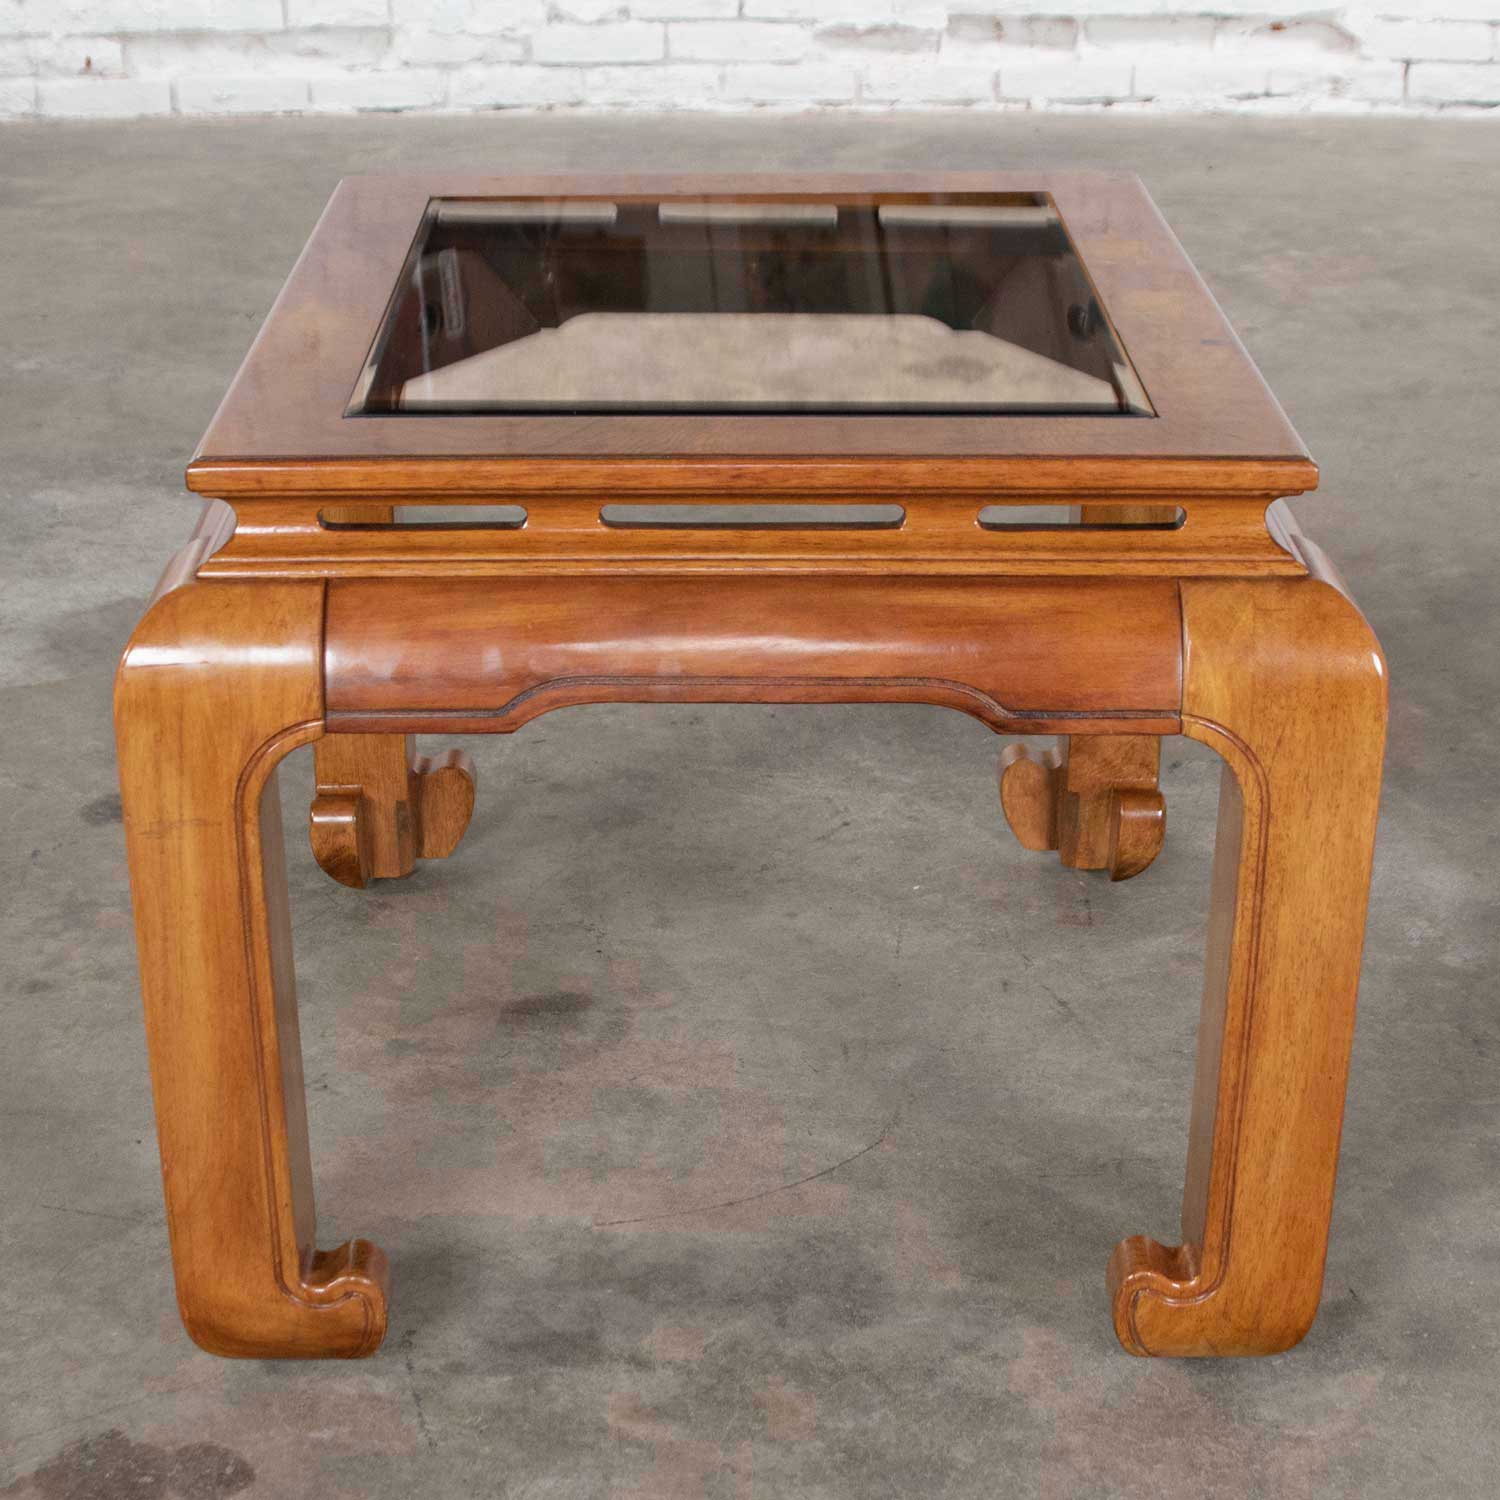 Chinoiserie Chow Leg Ming Style End Table Smoke Glass Top Insert Schnadig International Furniture